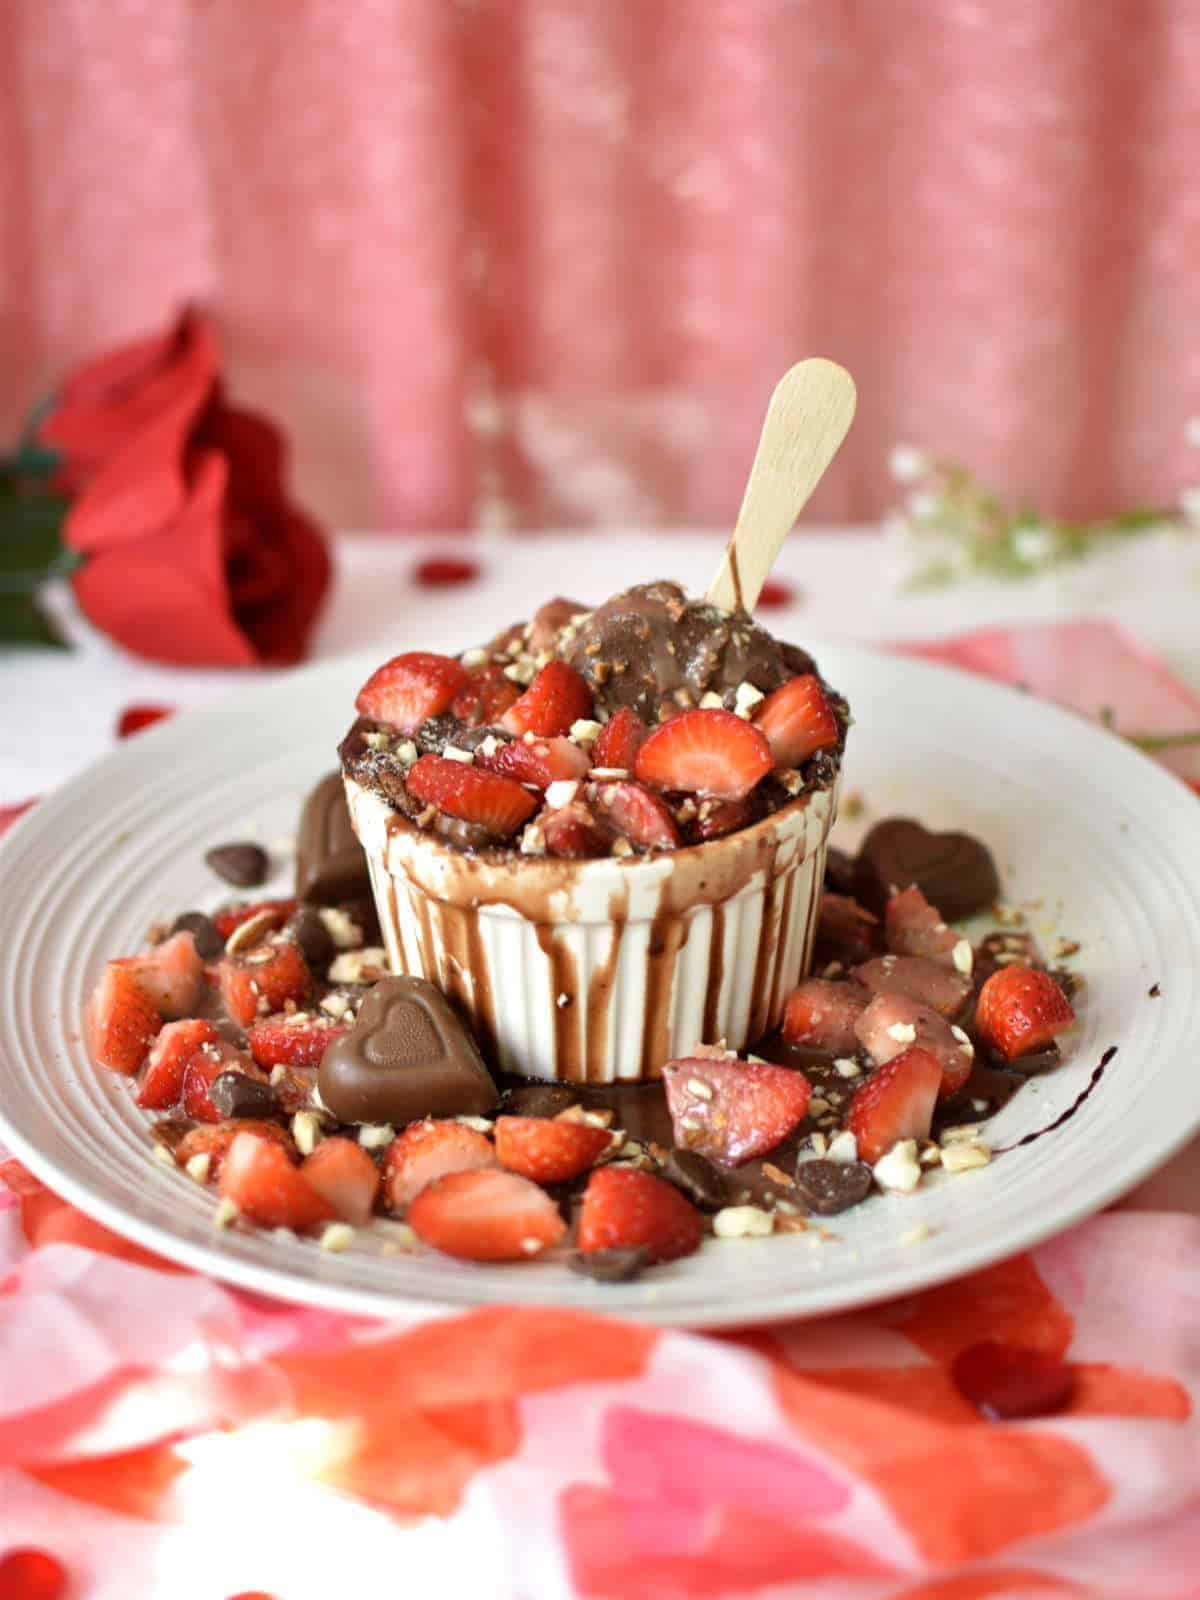 Molten Chocolate Souffle topped with Fresh Strawberries and then inserted with an ice cream bar